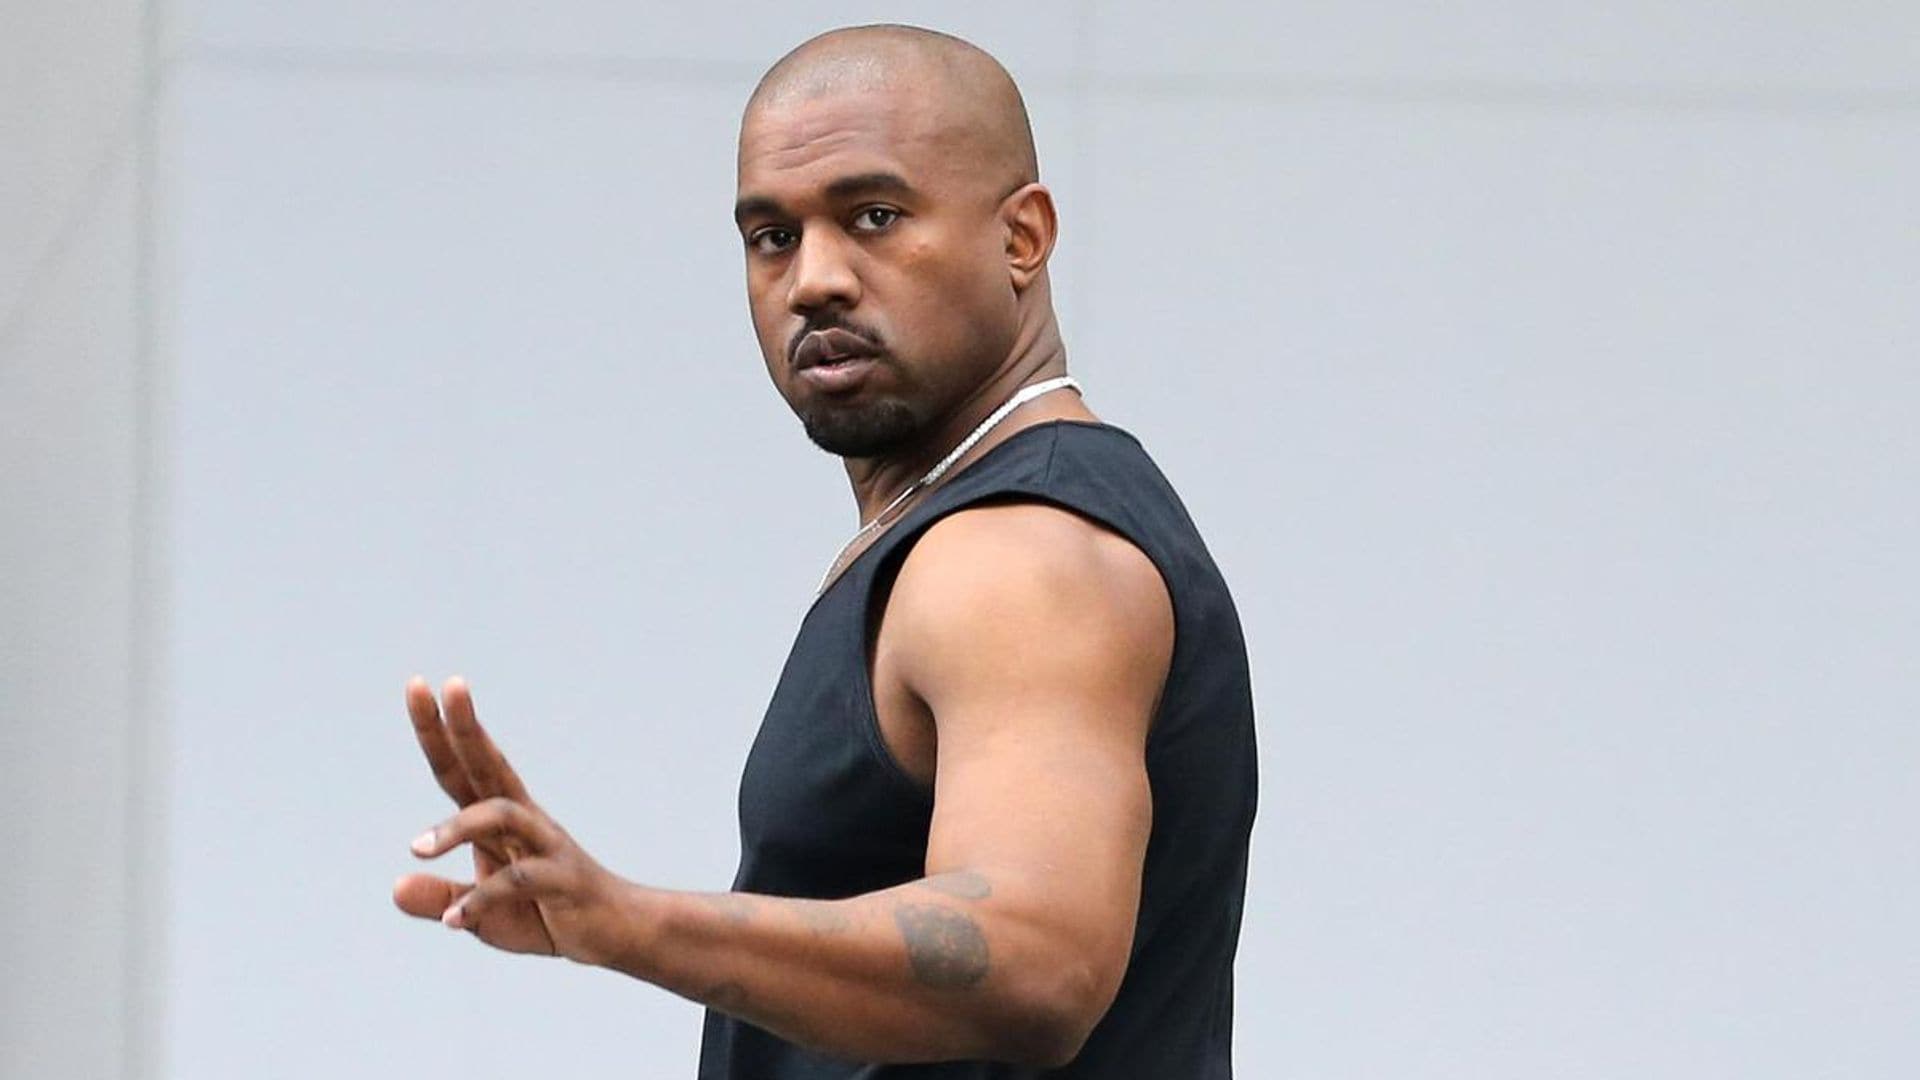 A petition to remove Kanye West from Coachella has nearly 50,000 signatures